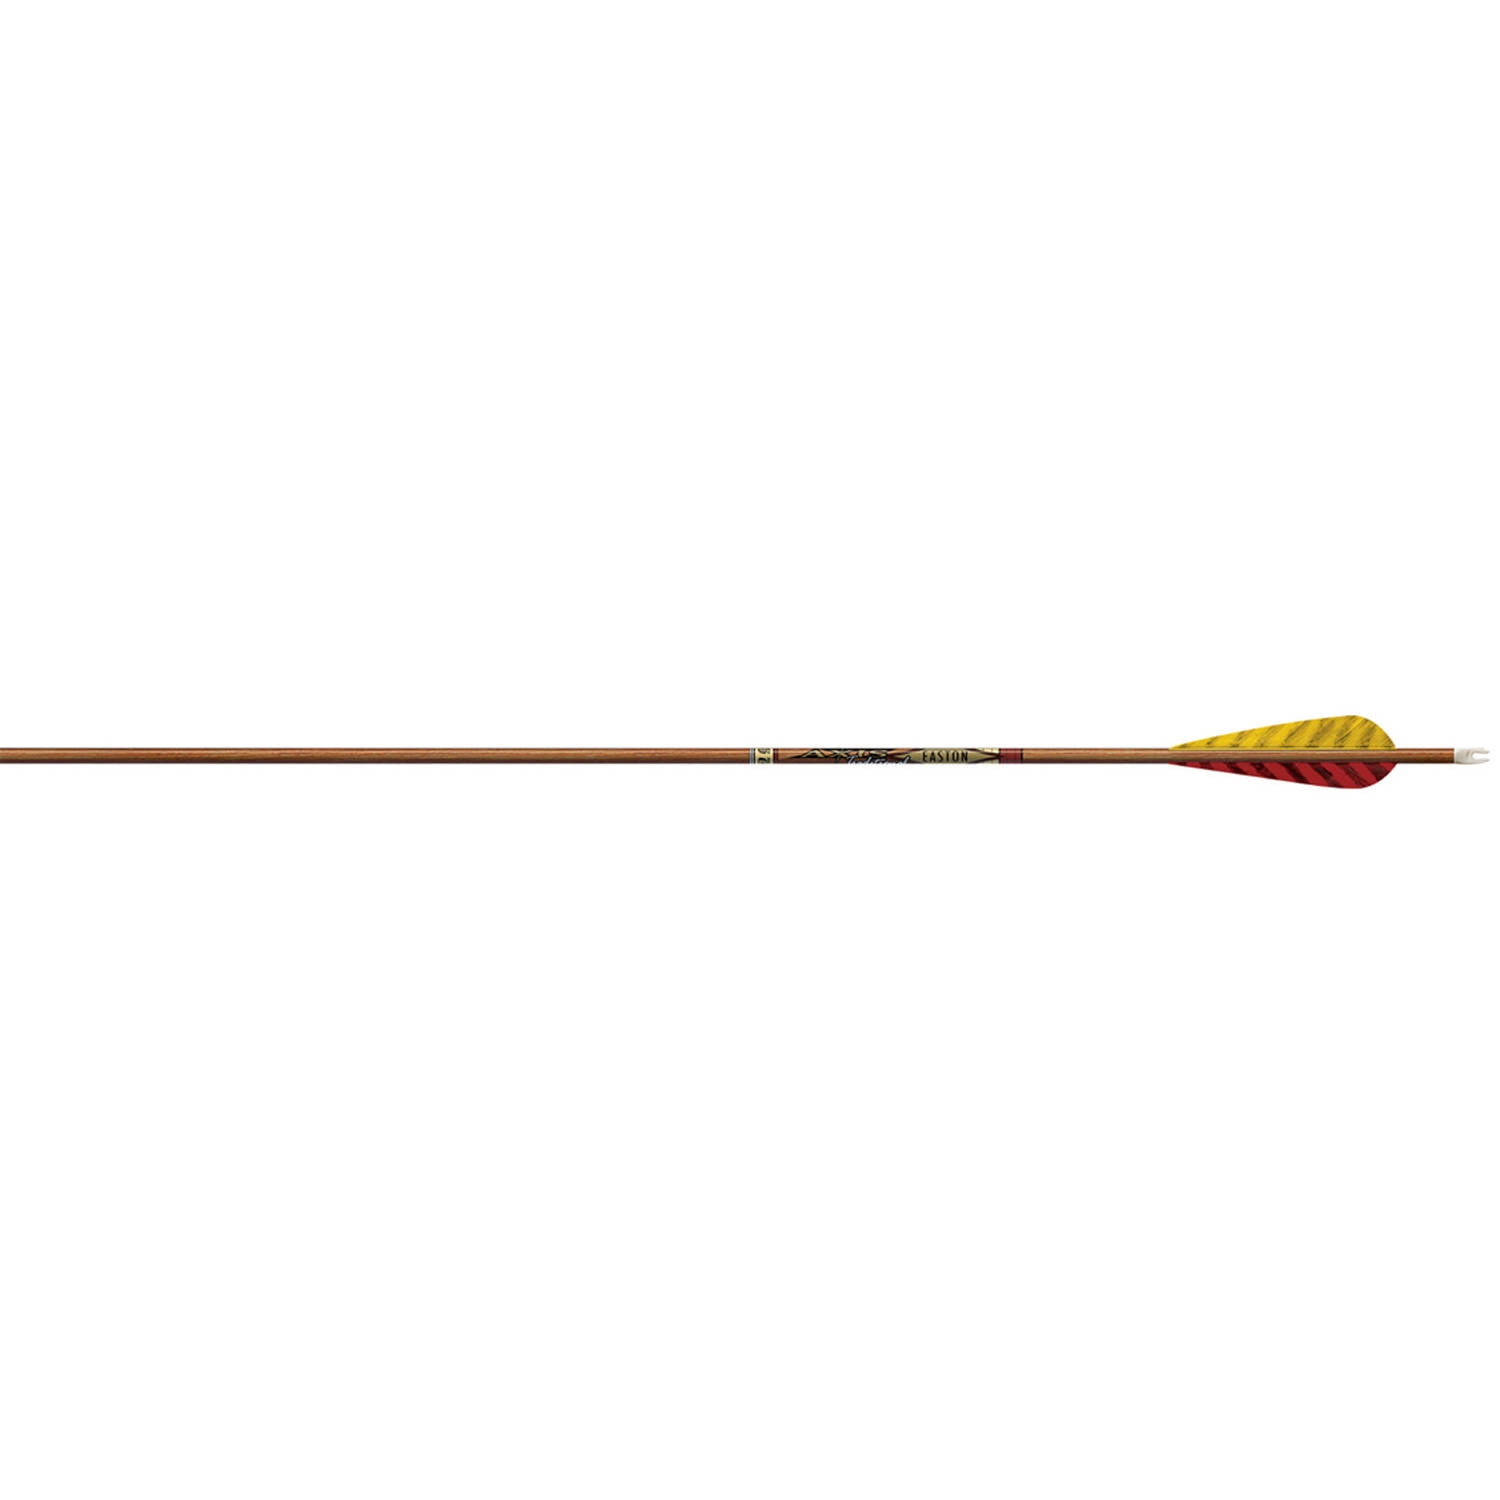 12 Easton Axis Traditional 5MM 500 Carbon Arrow Shafts 